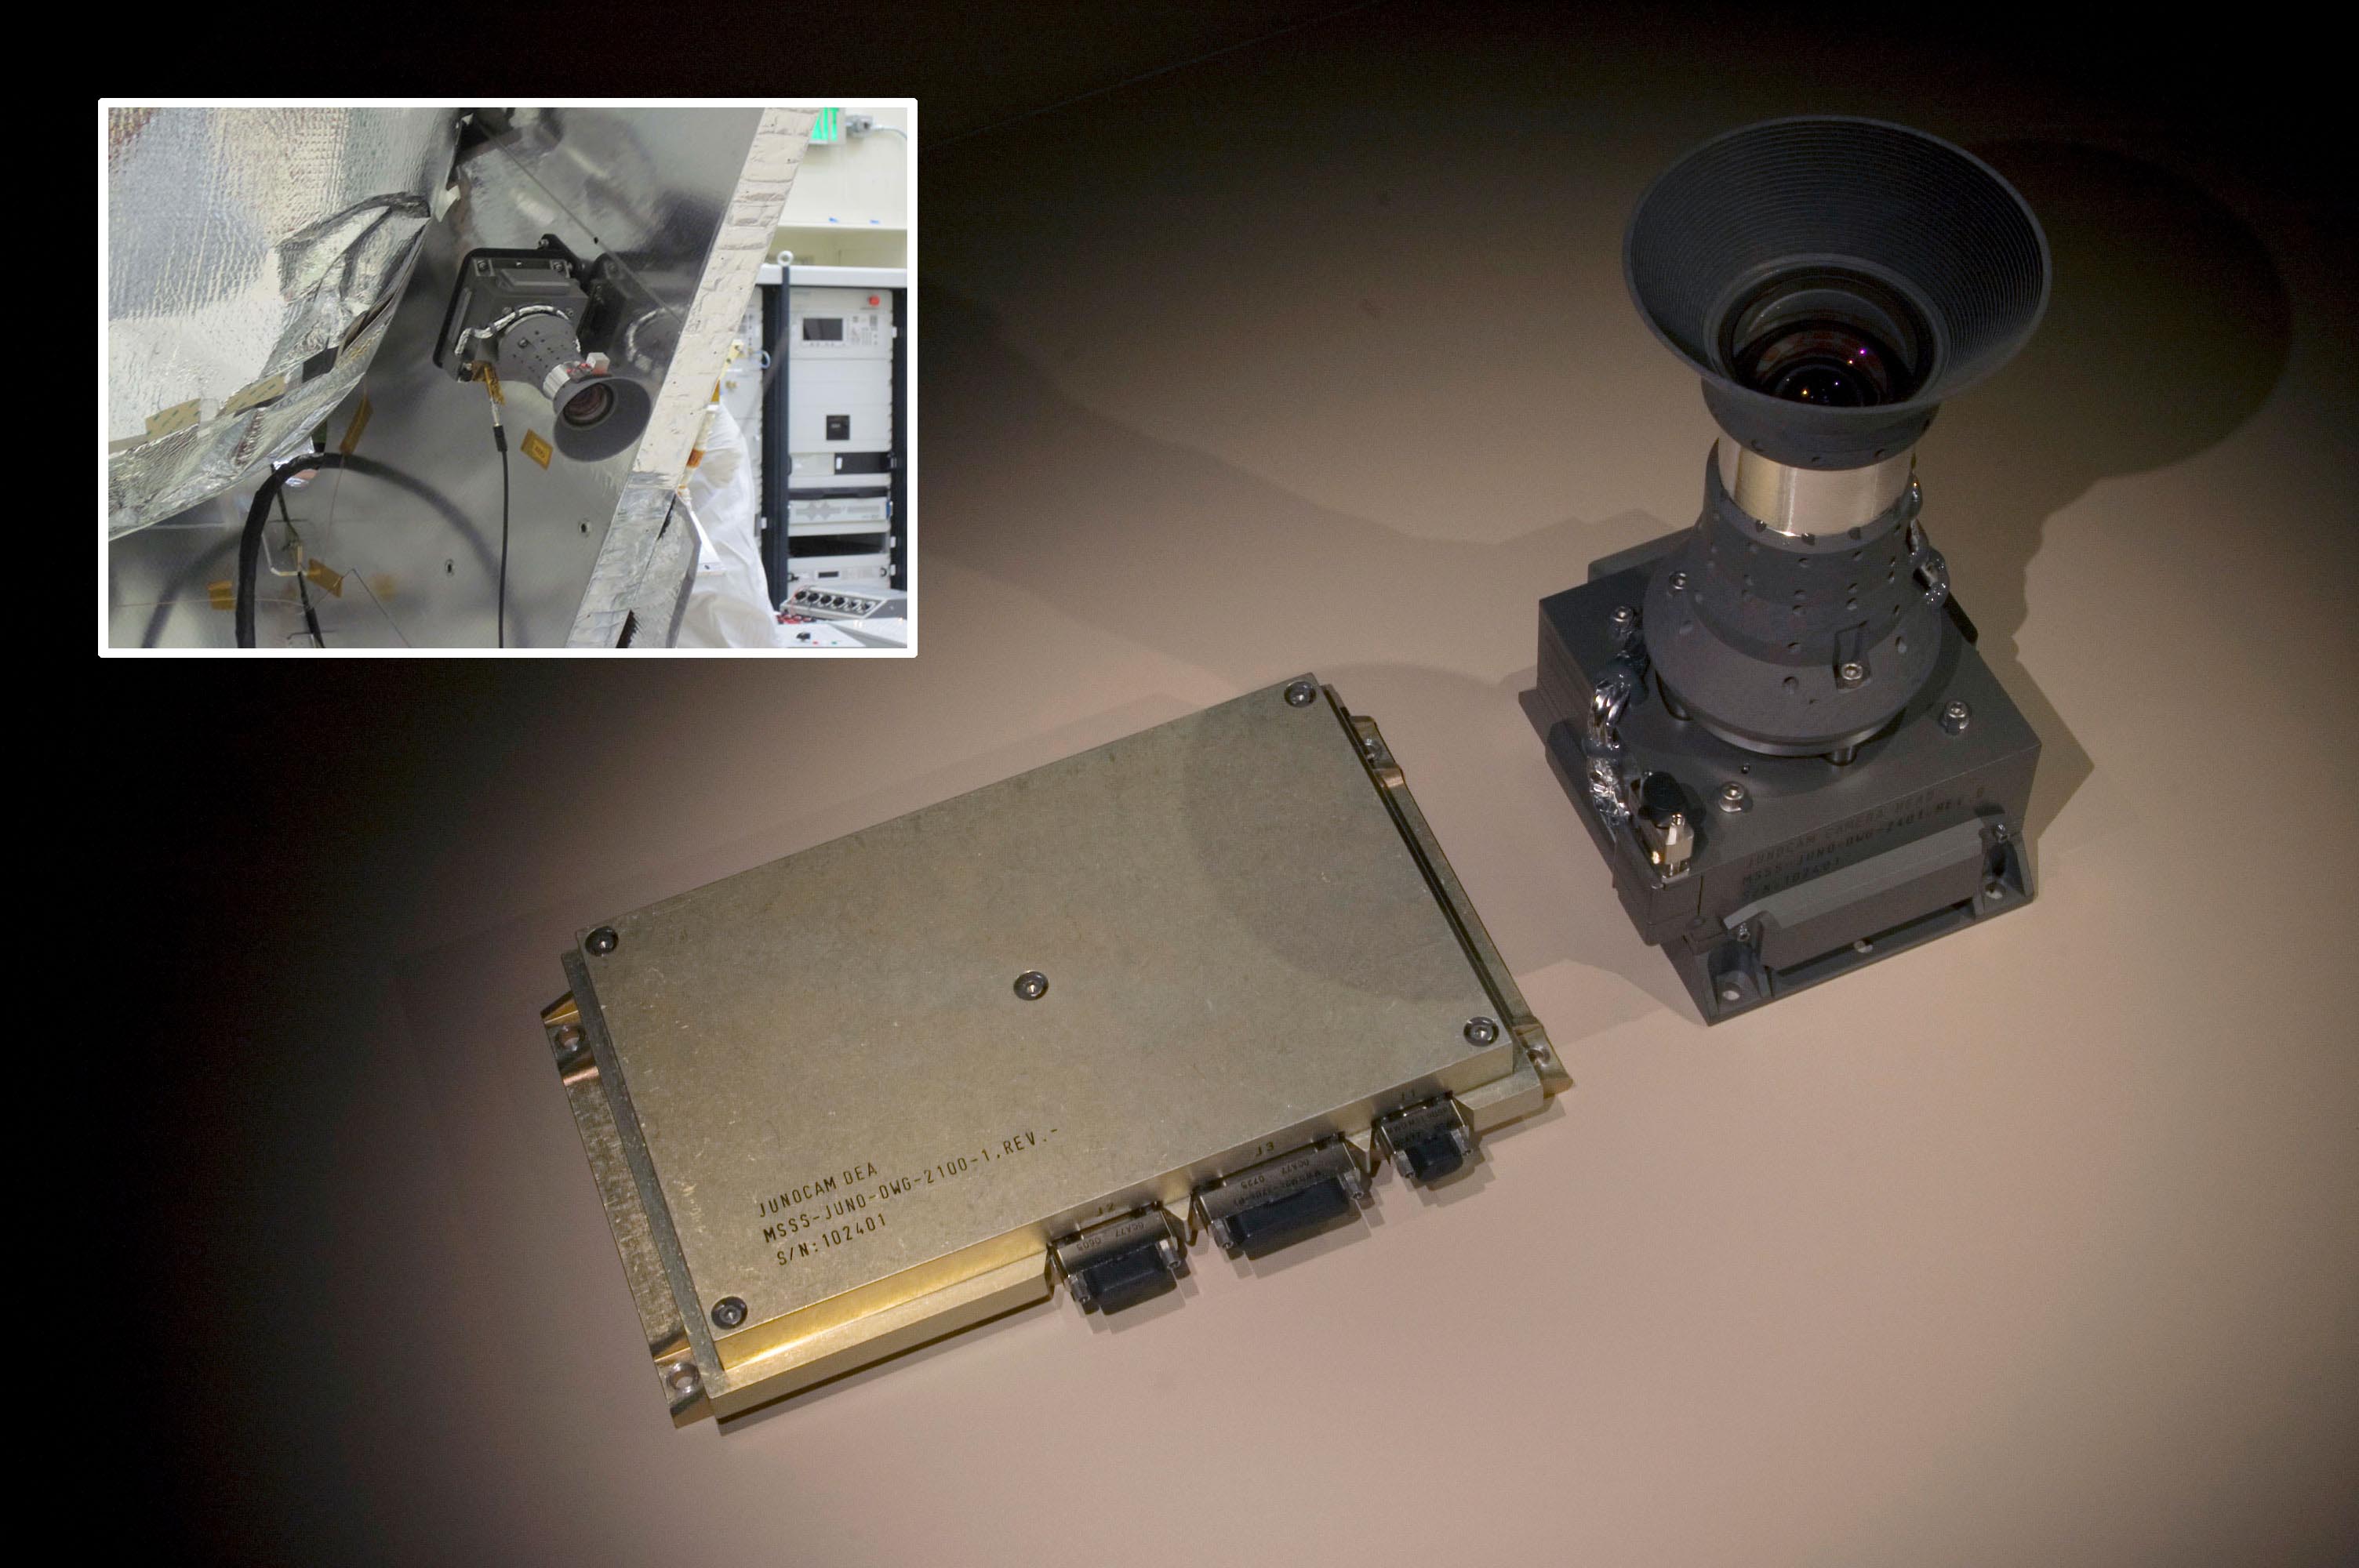 The JunoCam consists of a camera head and an electronics box, which is housed inside the spacecraft’s protective radiation vault). In the inset image, JunoCam is shown mounted on the orbiter. Credits: NASA / JPL-Caltech